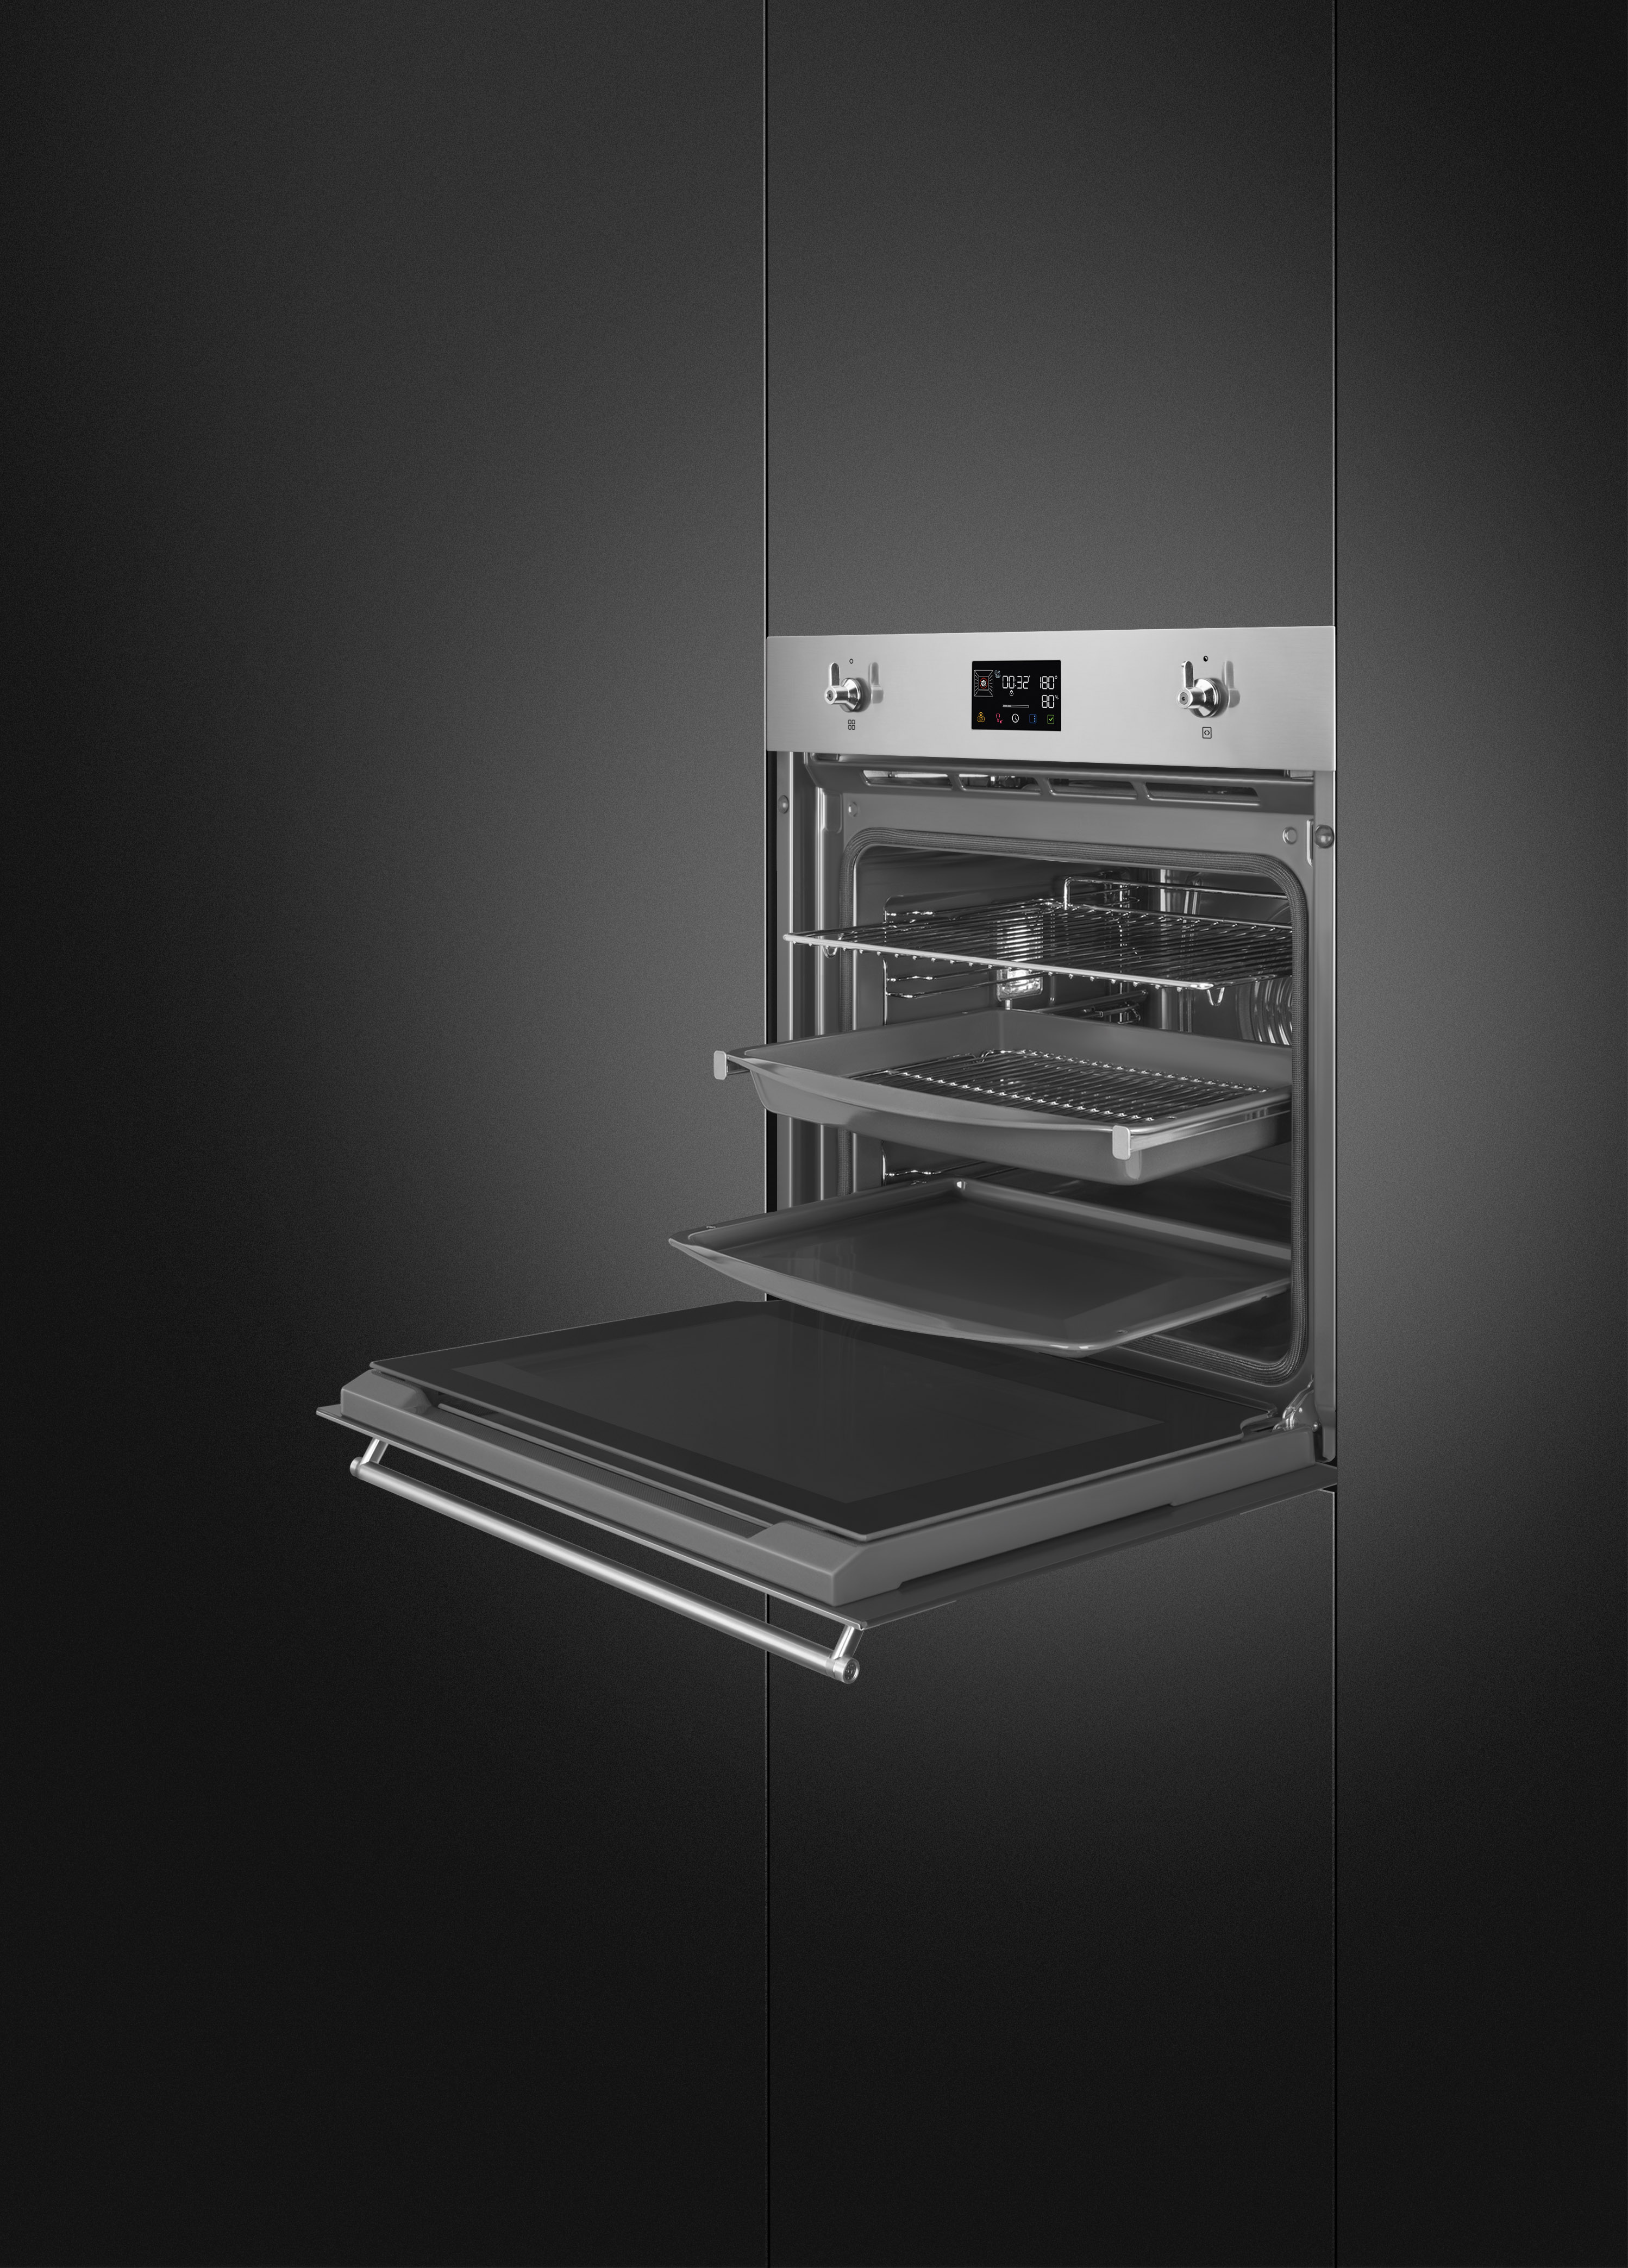 Stainless steel SteamOne Galileo Oven.  60cm. Built-in. Smeg_11